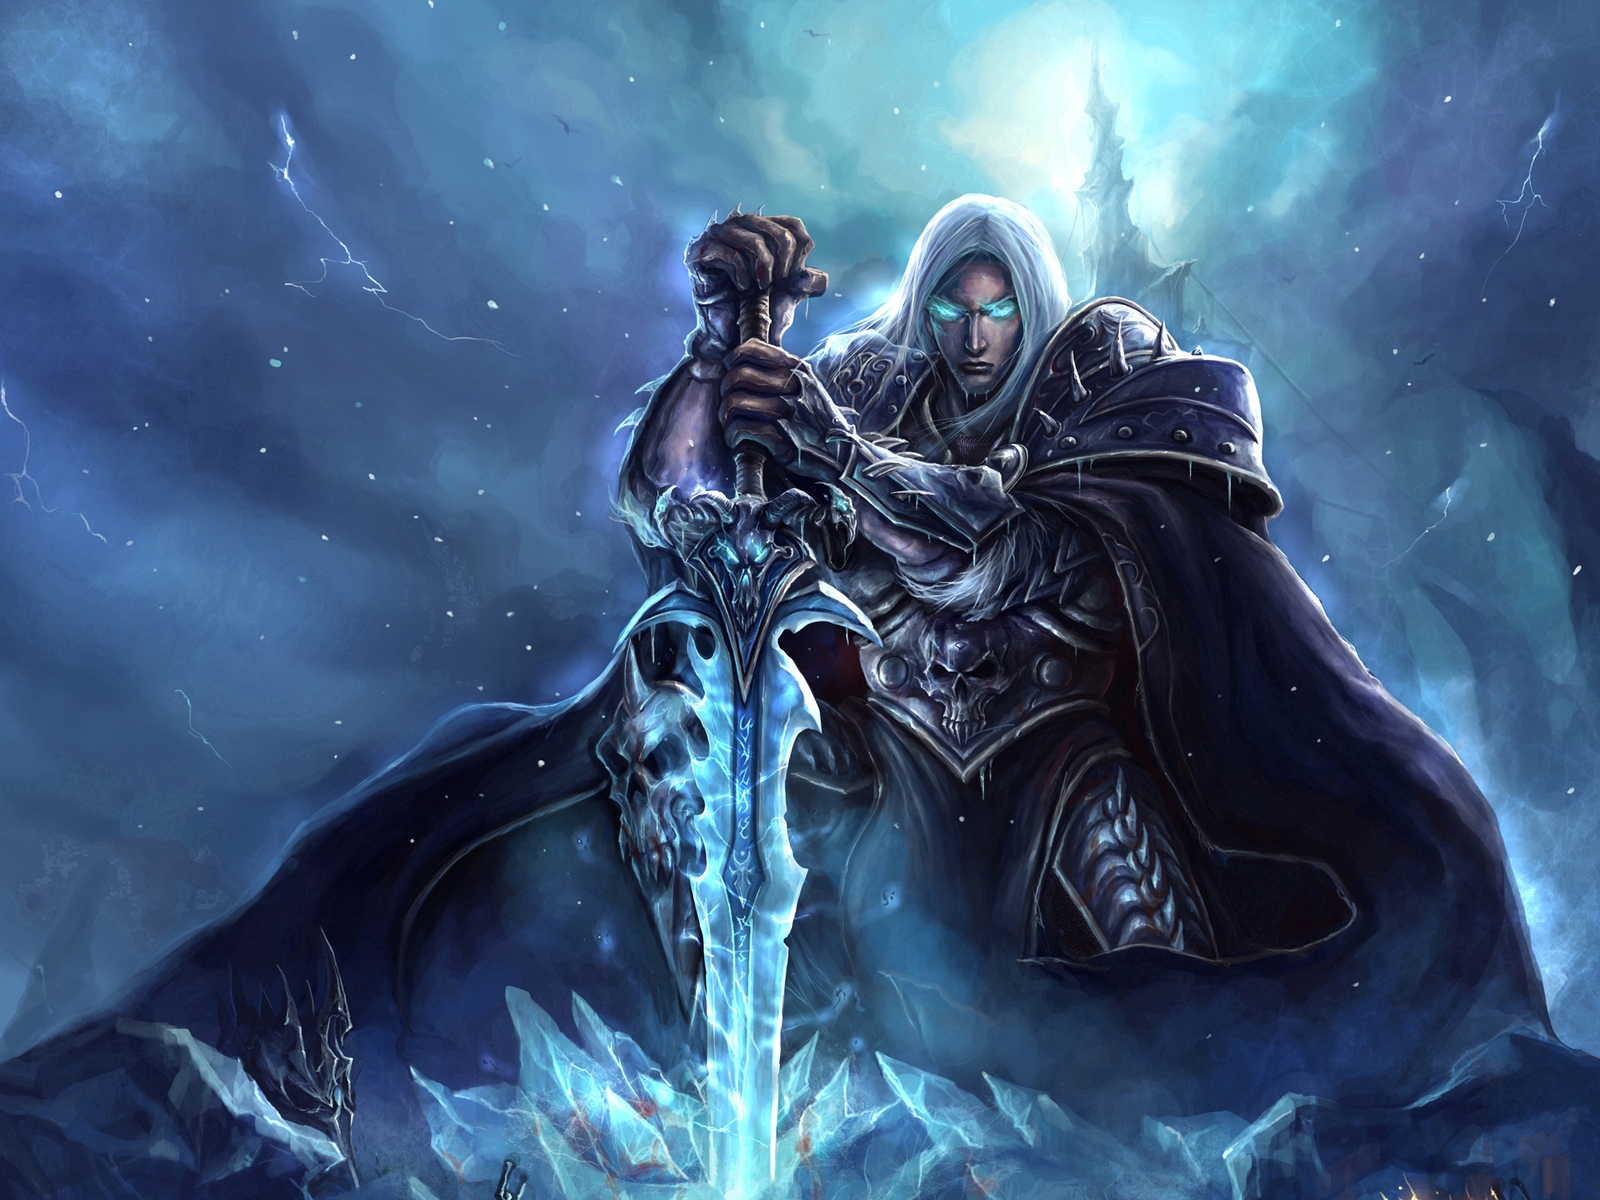 World of Warcraft Lich King Art for 1600 x 1200 resolution